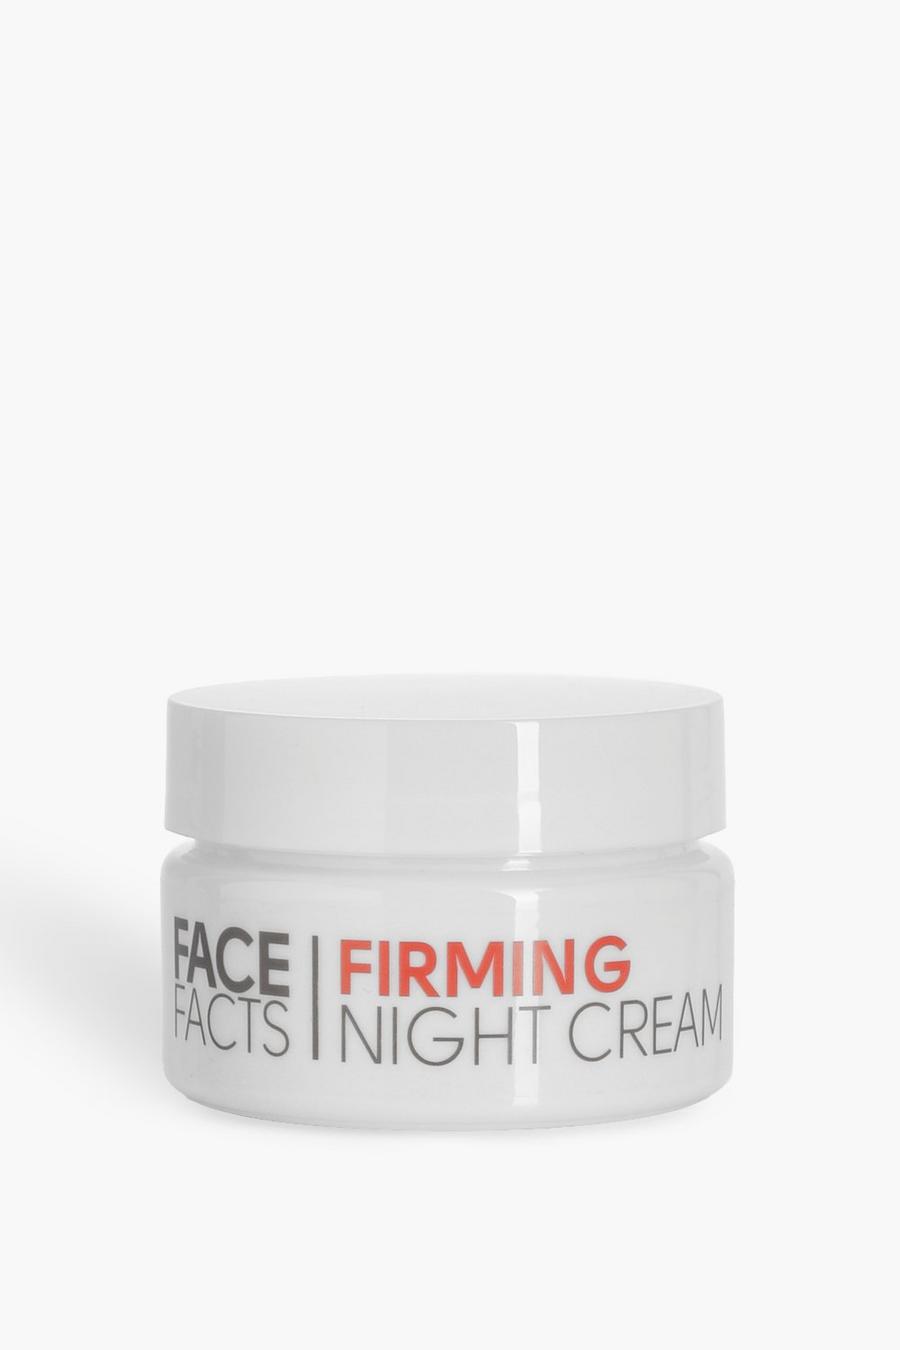 Face Facts Firming Night Cream image number 1